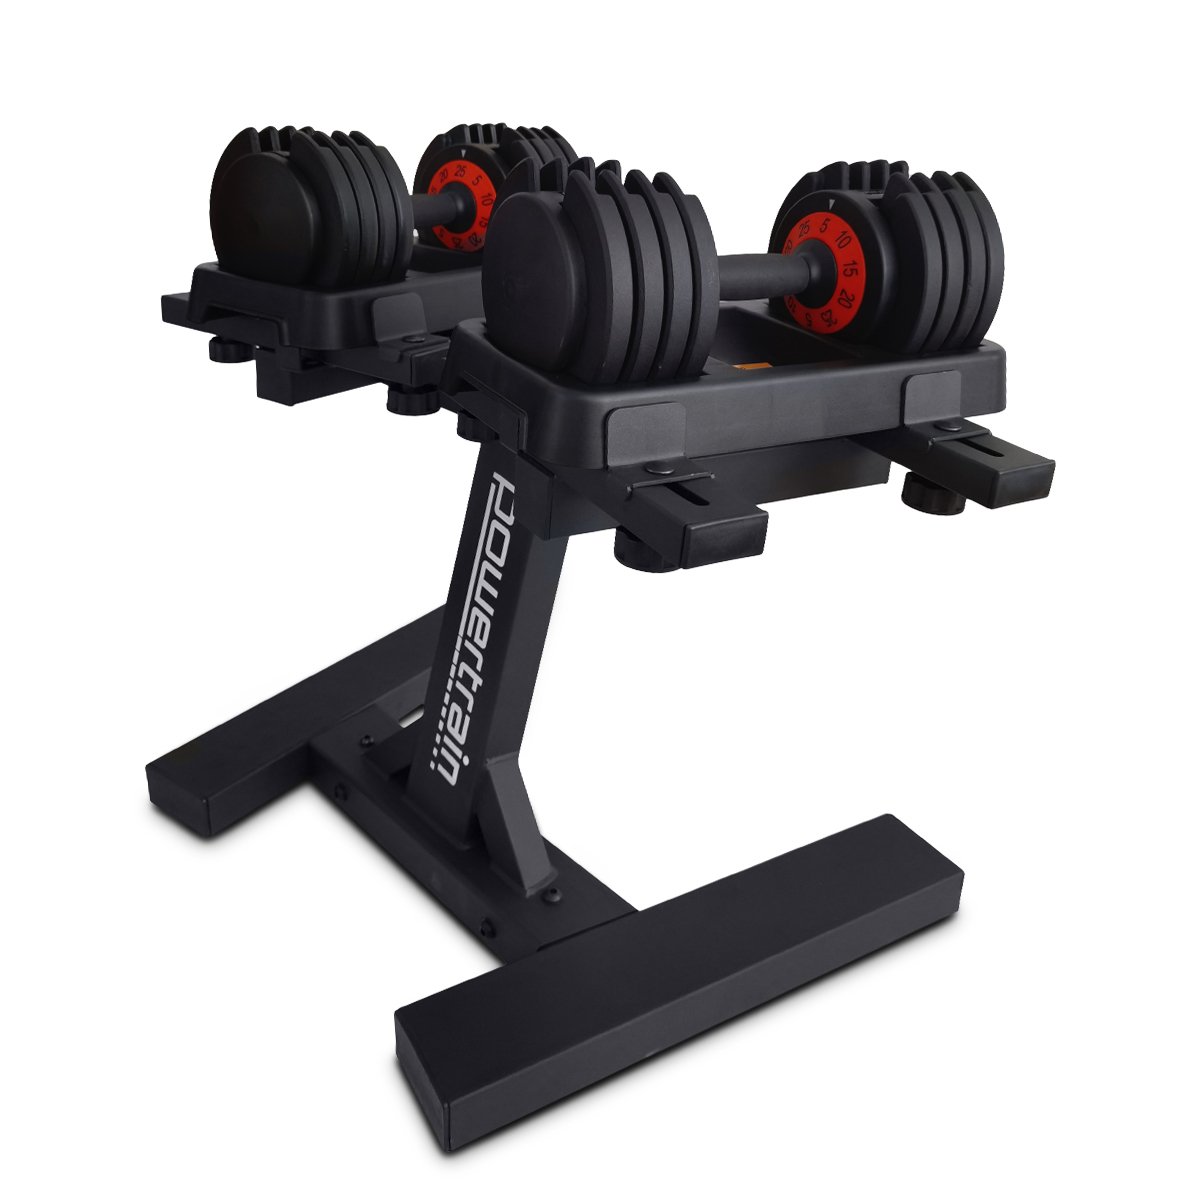 Sports & Fitness > Fitness Accessories - Powertrain GEN2 Pro Adjustable Dumbbell Set - 2 X 25kg (50kg) Home Gym Weights With Stand